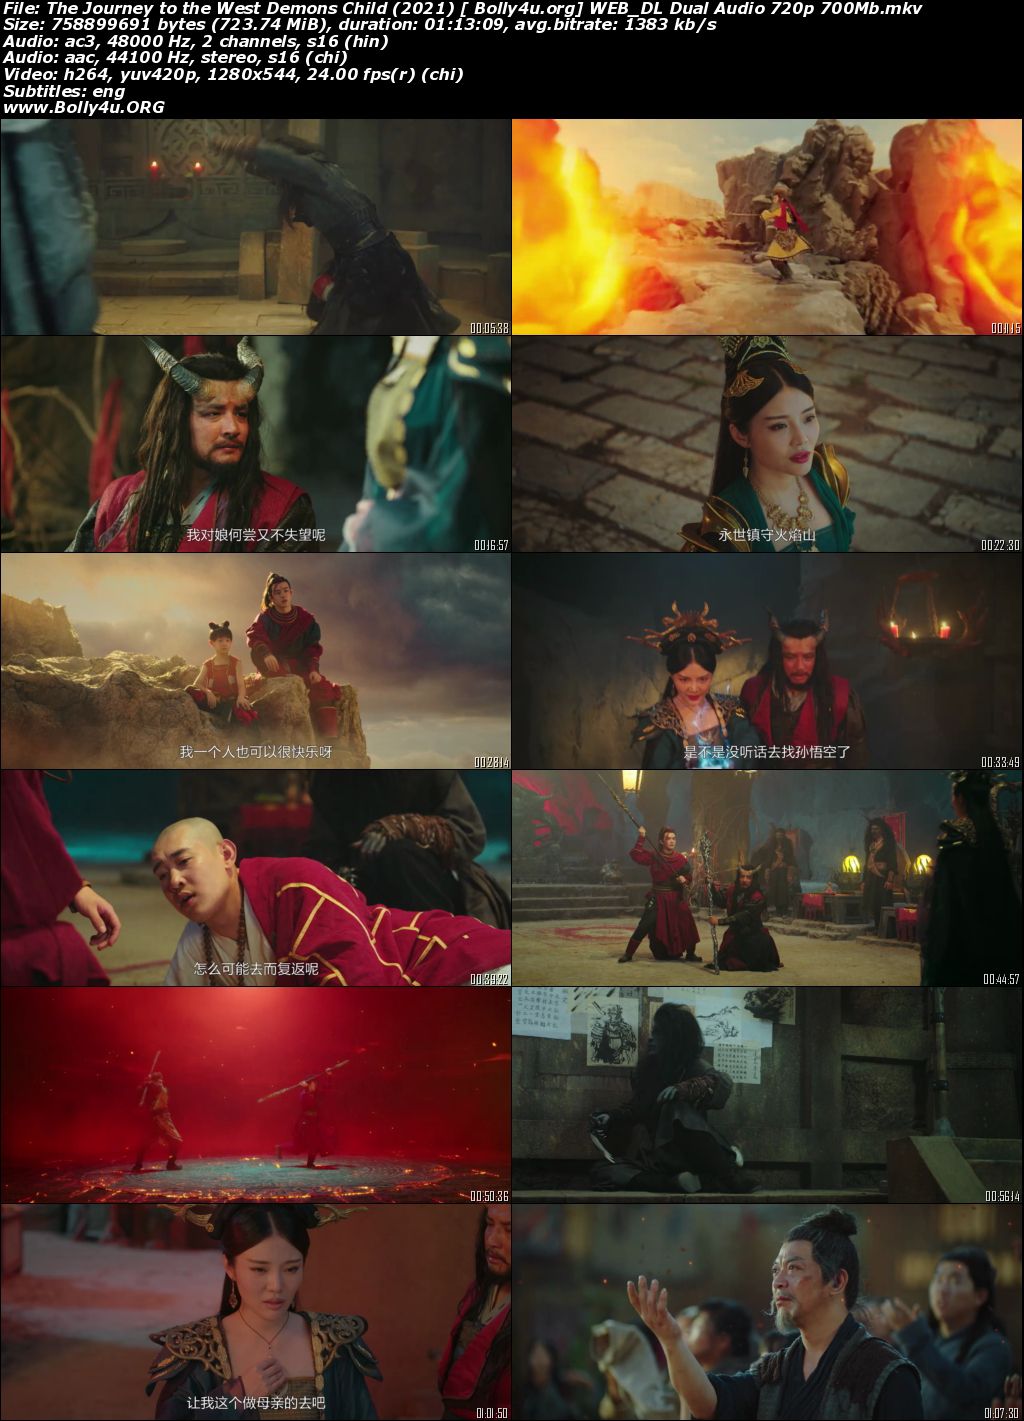 The Journey to the West Demons Child 2021 WEB-DL Hindi Dual Audio Full Movie Download